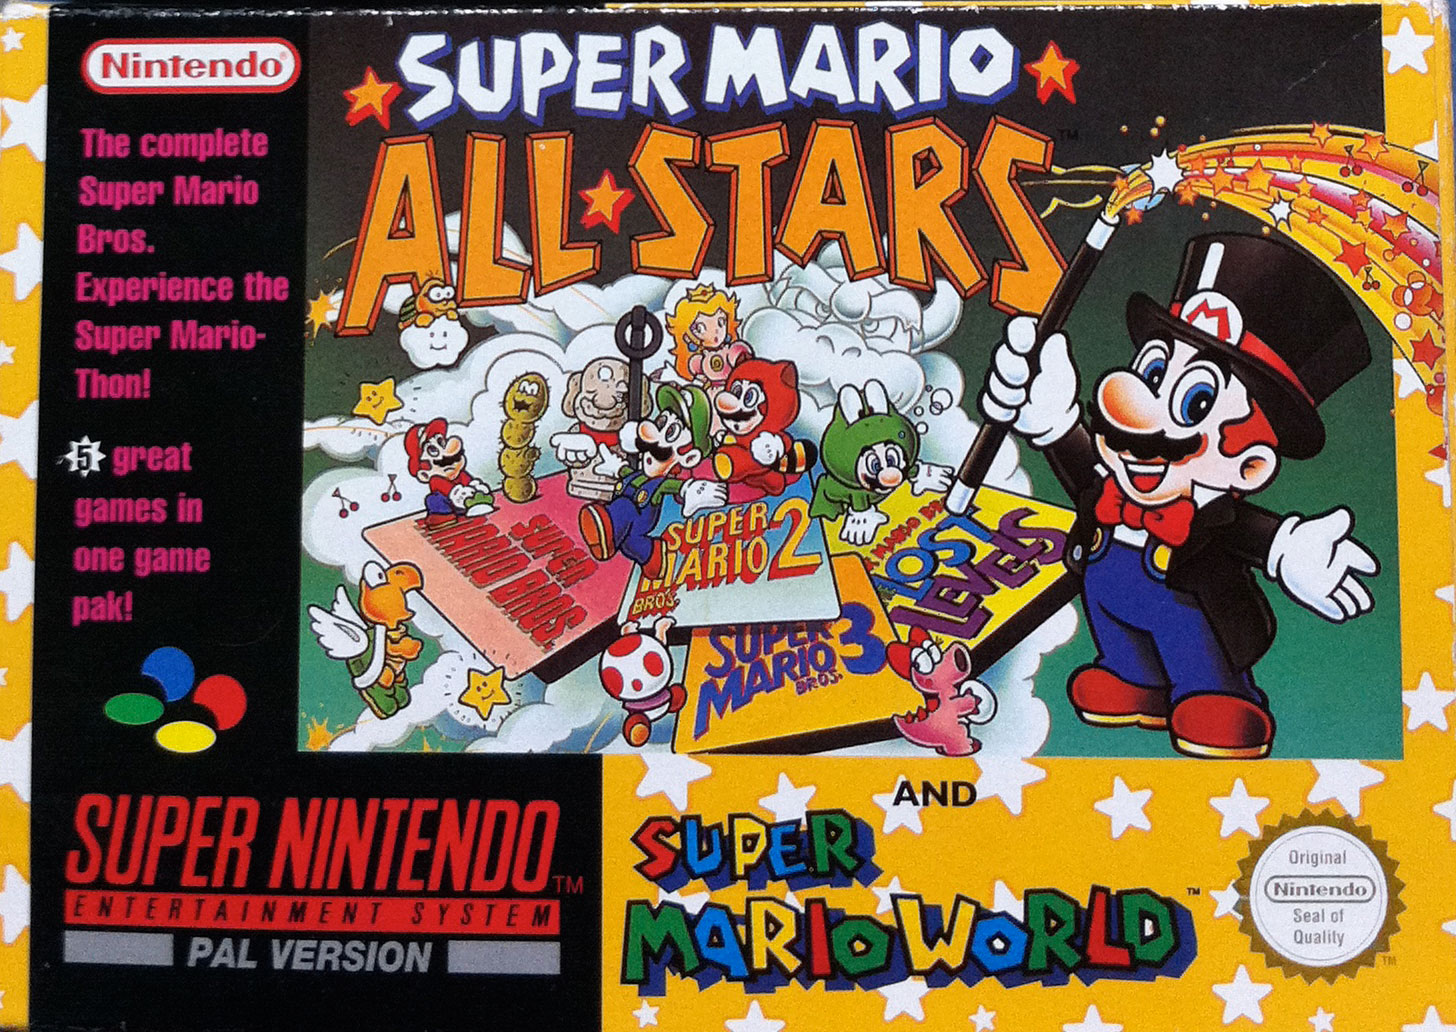 super mario all stars game free download for pc